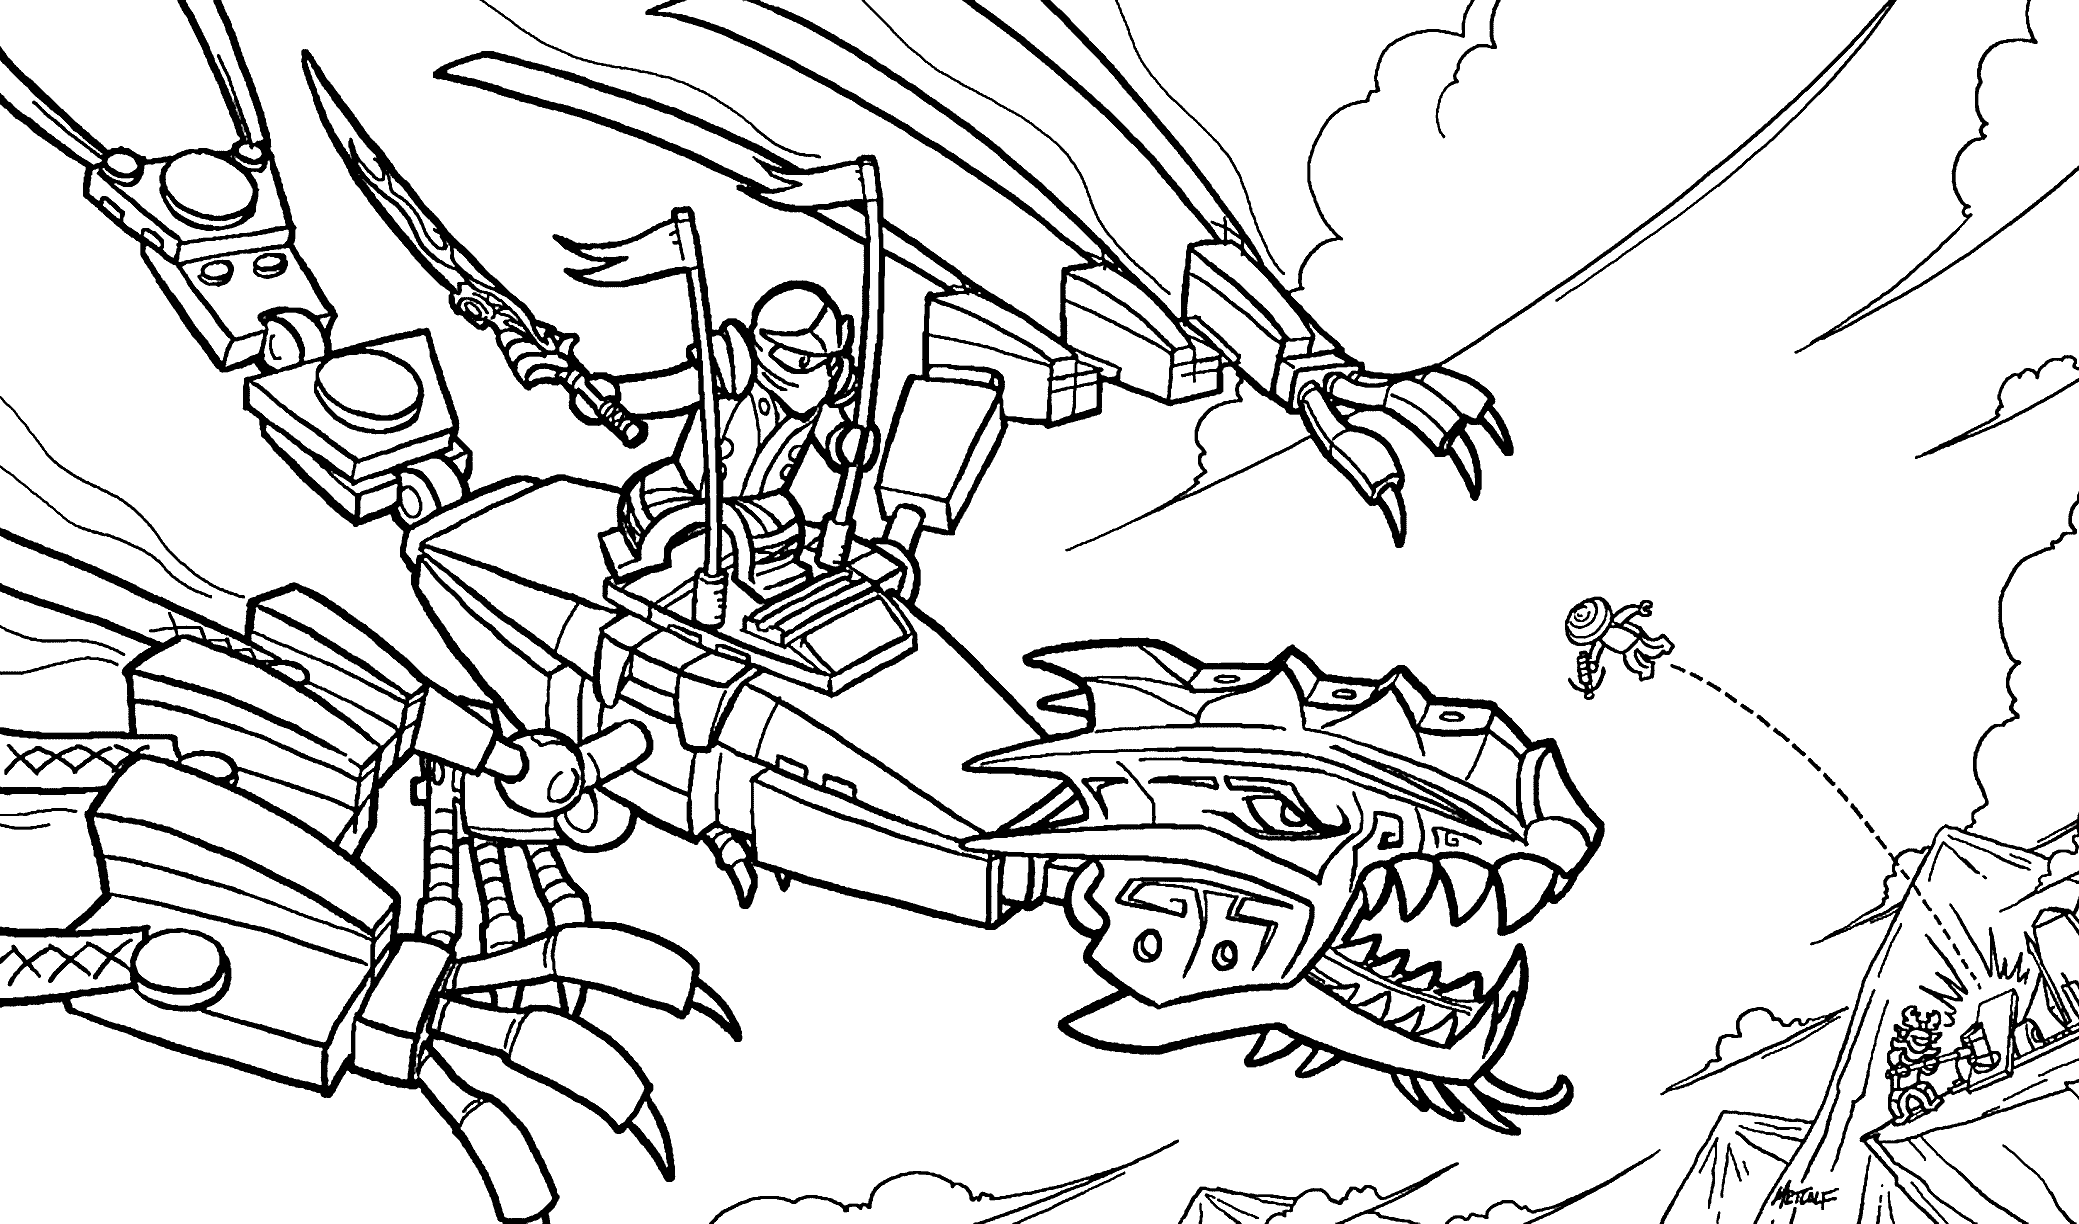 Ninjago attack coloring pages for kids, printable free | Coloring ...